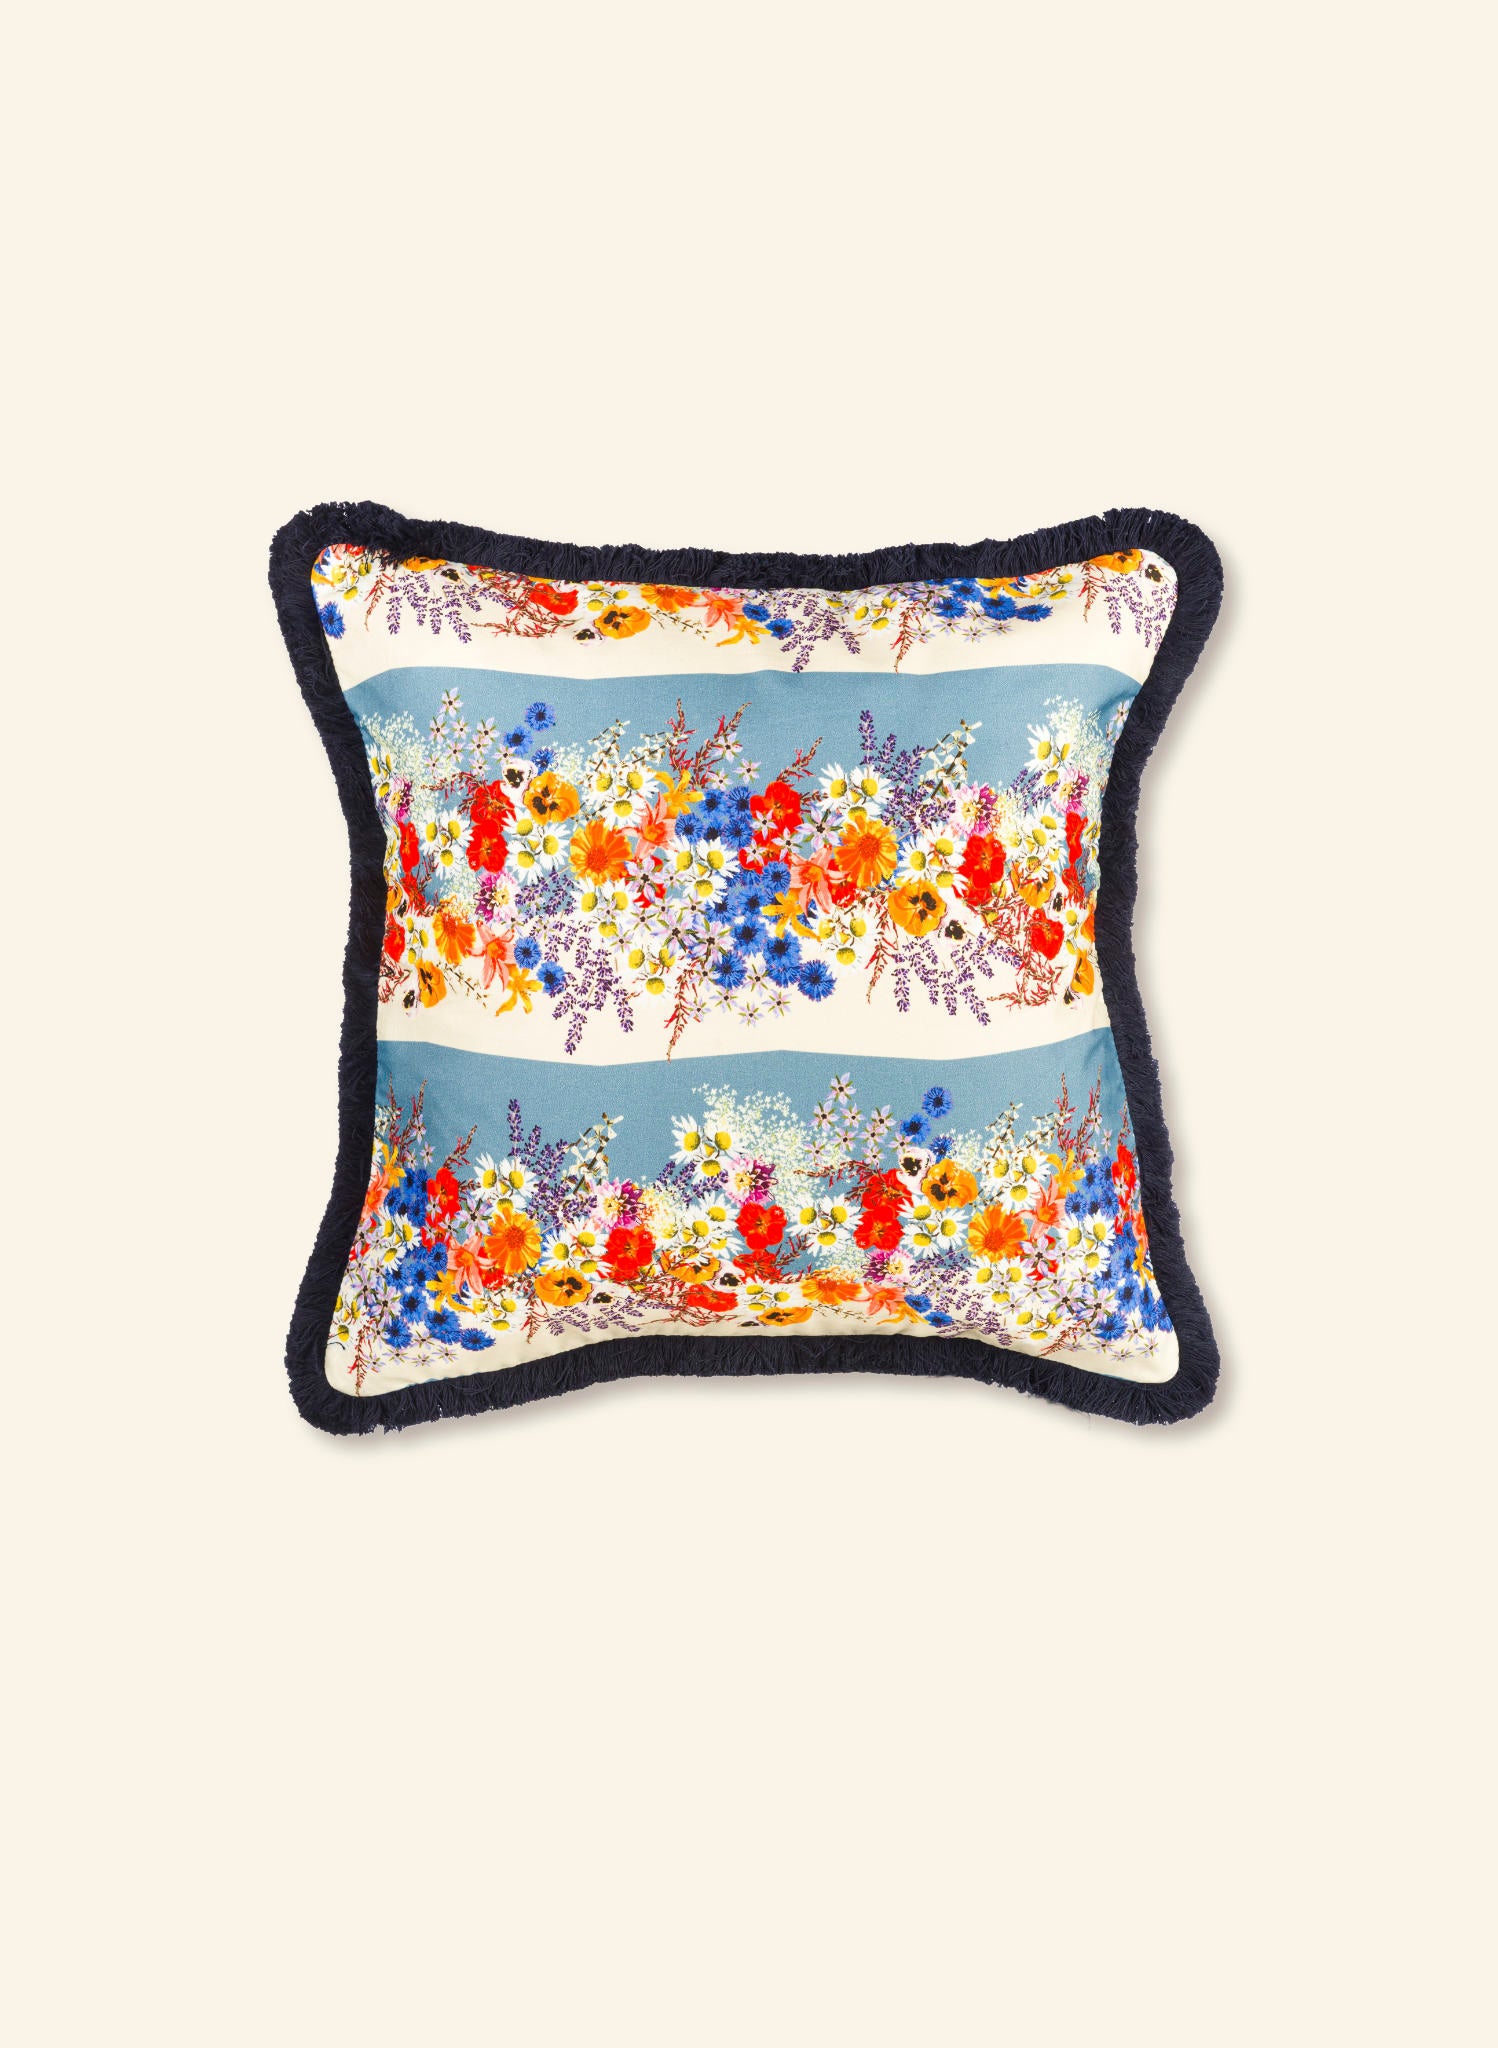 Large Cushion Cover - Edible Flowers